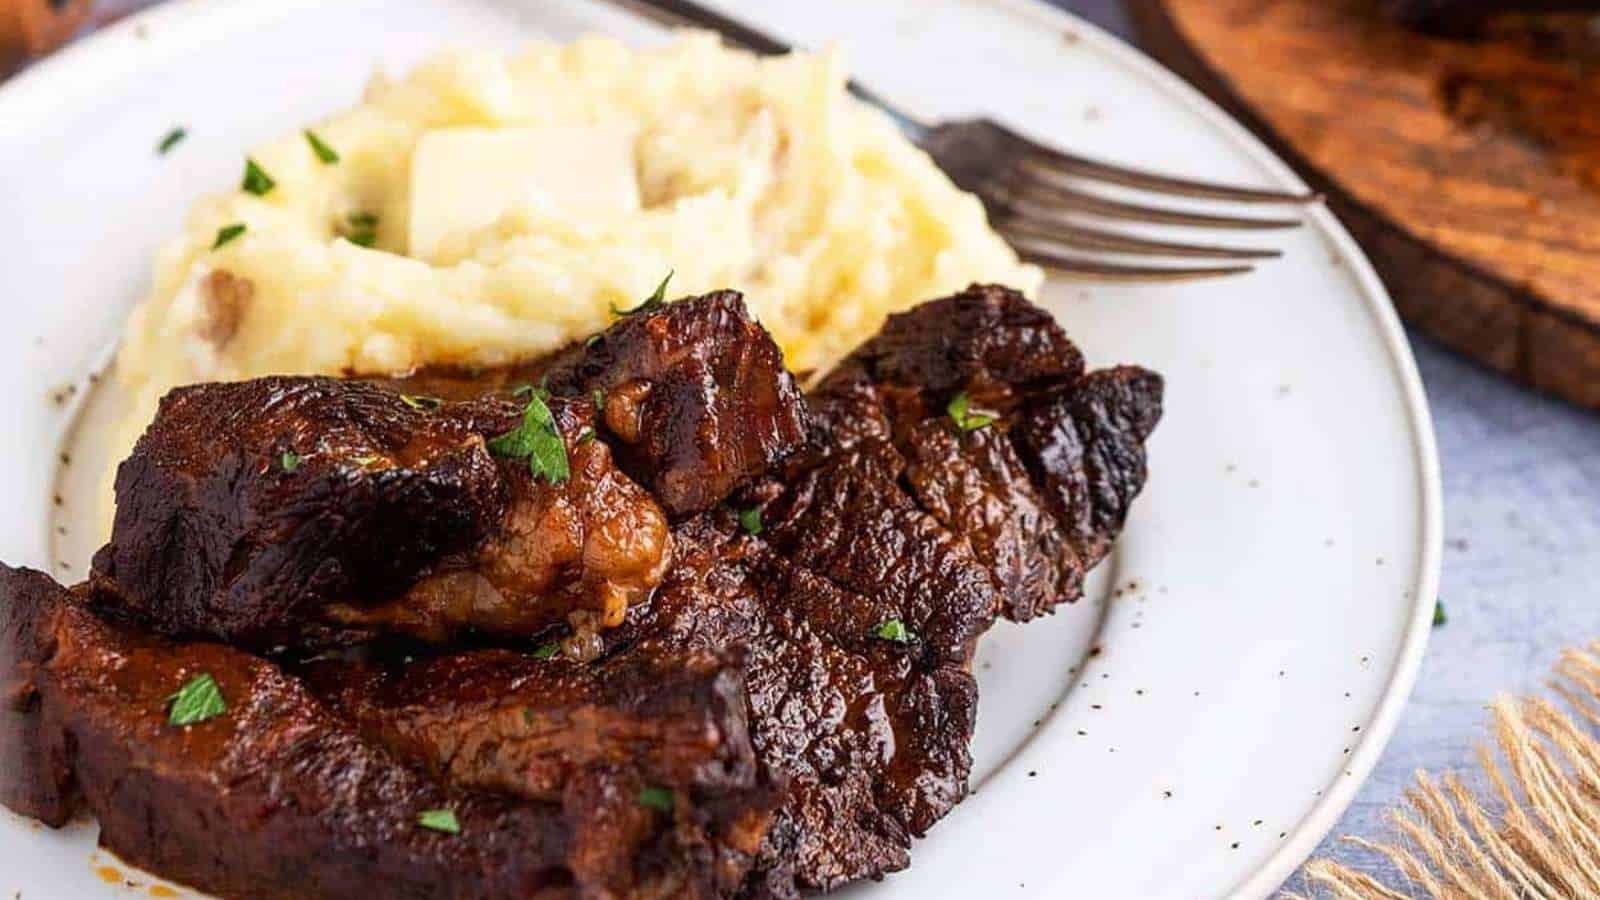 Ribs on a plate with mashed potatoes.